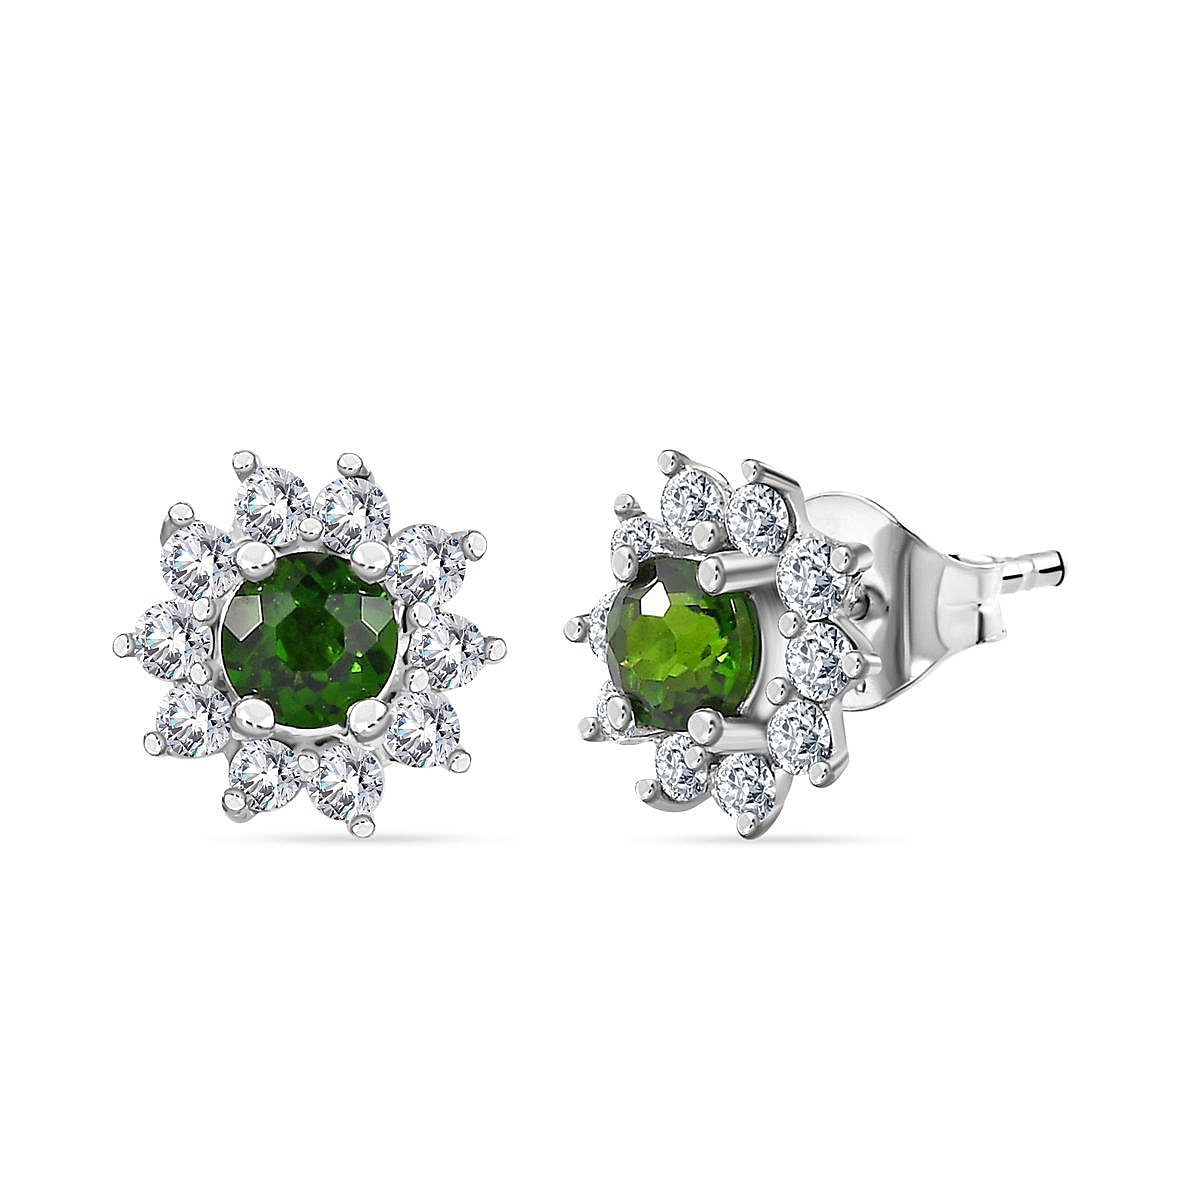 Natural Chrome Diopside & Natural Zircon Halo Stud Earrings in Platinum Overlay Sterling Silver 1.00 Ct.